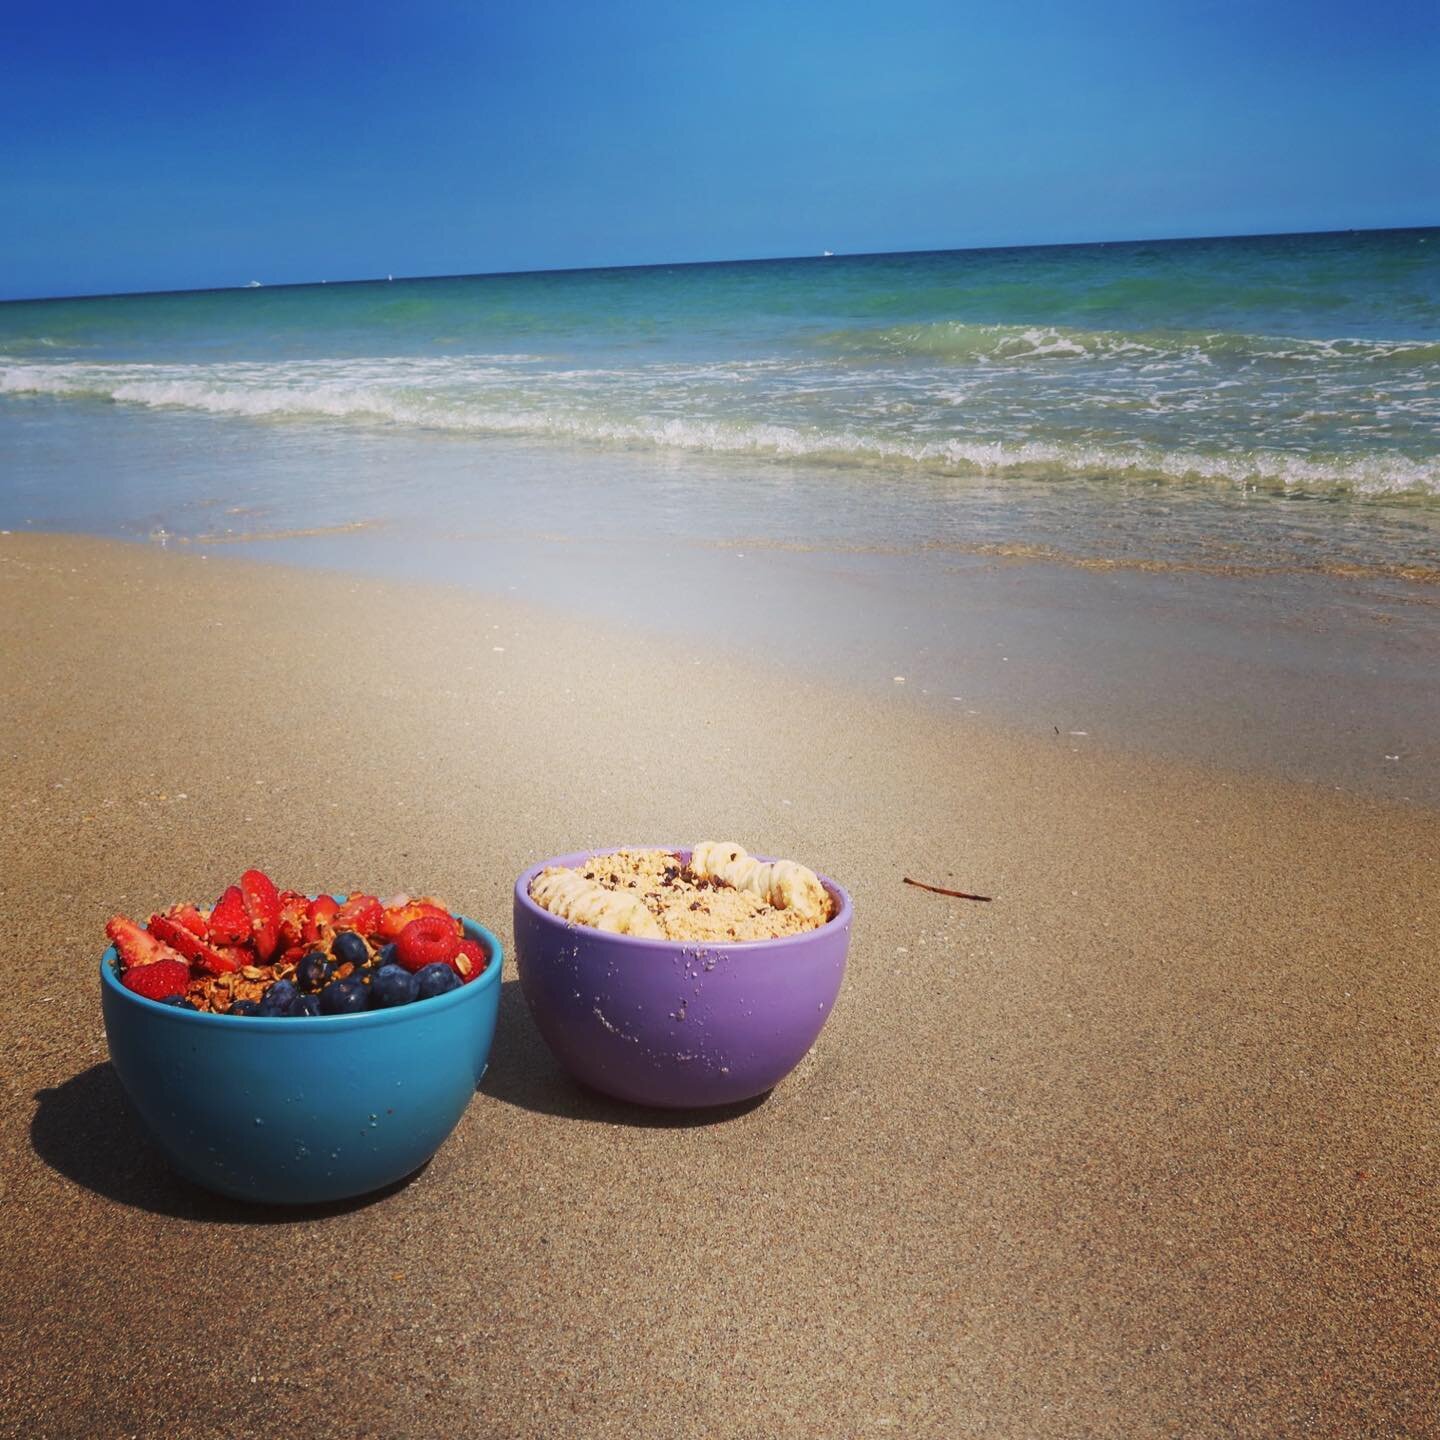 It's always summer in southern Florida! 😉🏖️

On a hot beach day pack a cooler with some acai. Stay fueled in the heat.

#wiltonmanors #wiltonmanorsfl #wiltonmanorsgay #acai #acaibowl #superfood #smoothiebowl -#ftlauderdalebeach